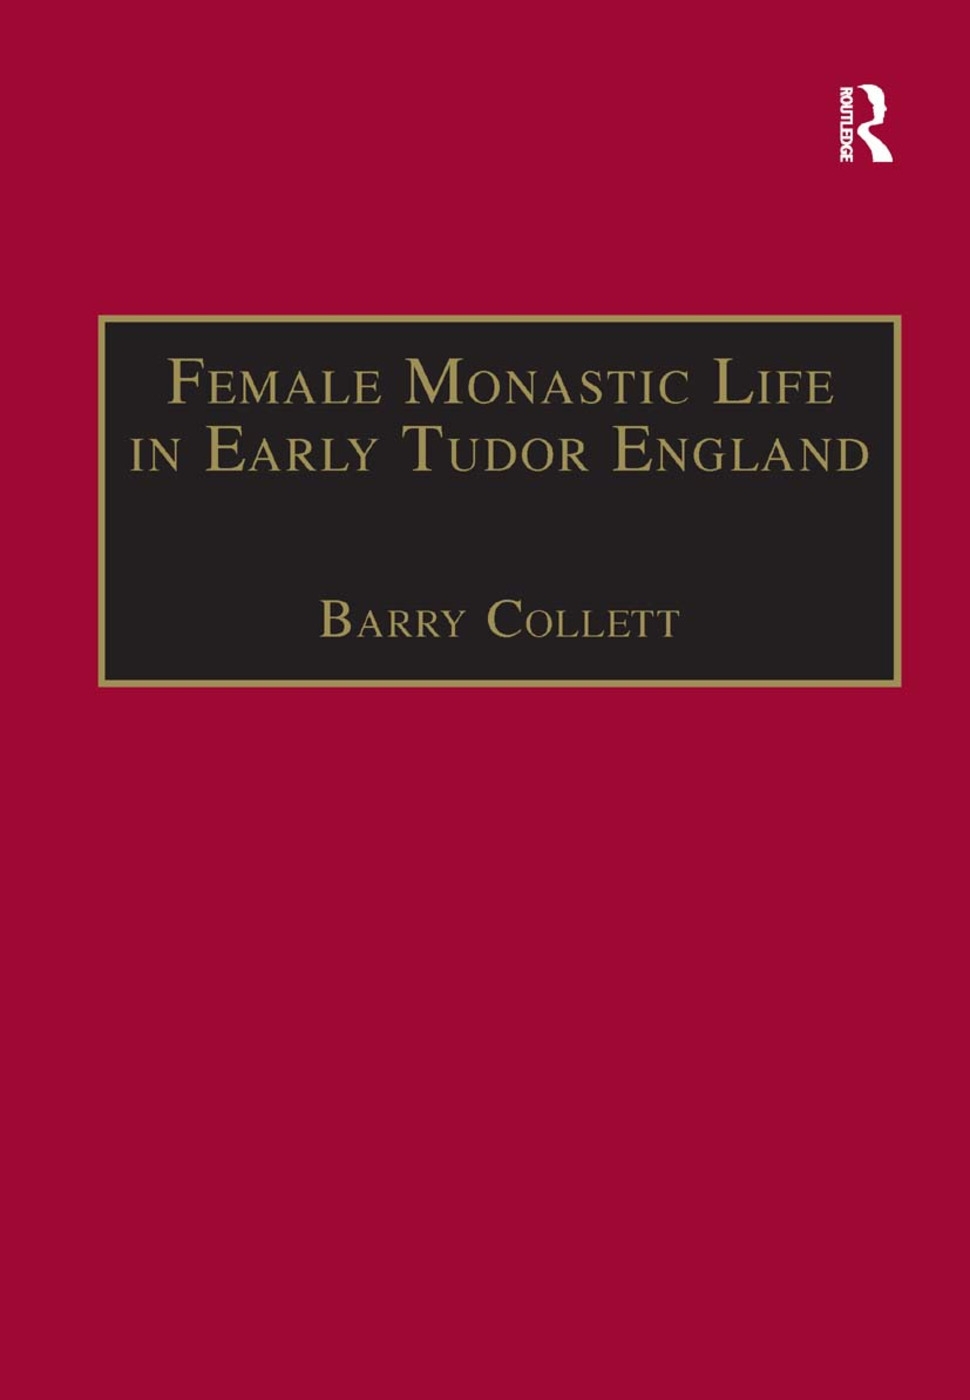 Female Monastic Life in Early Tudor England: With an Edition of Richard Fox’s Translation of the Benedictine Rule for Women, 151